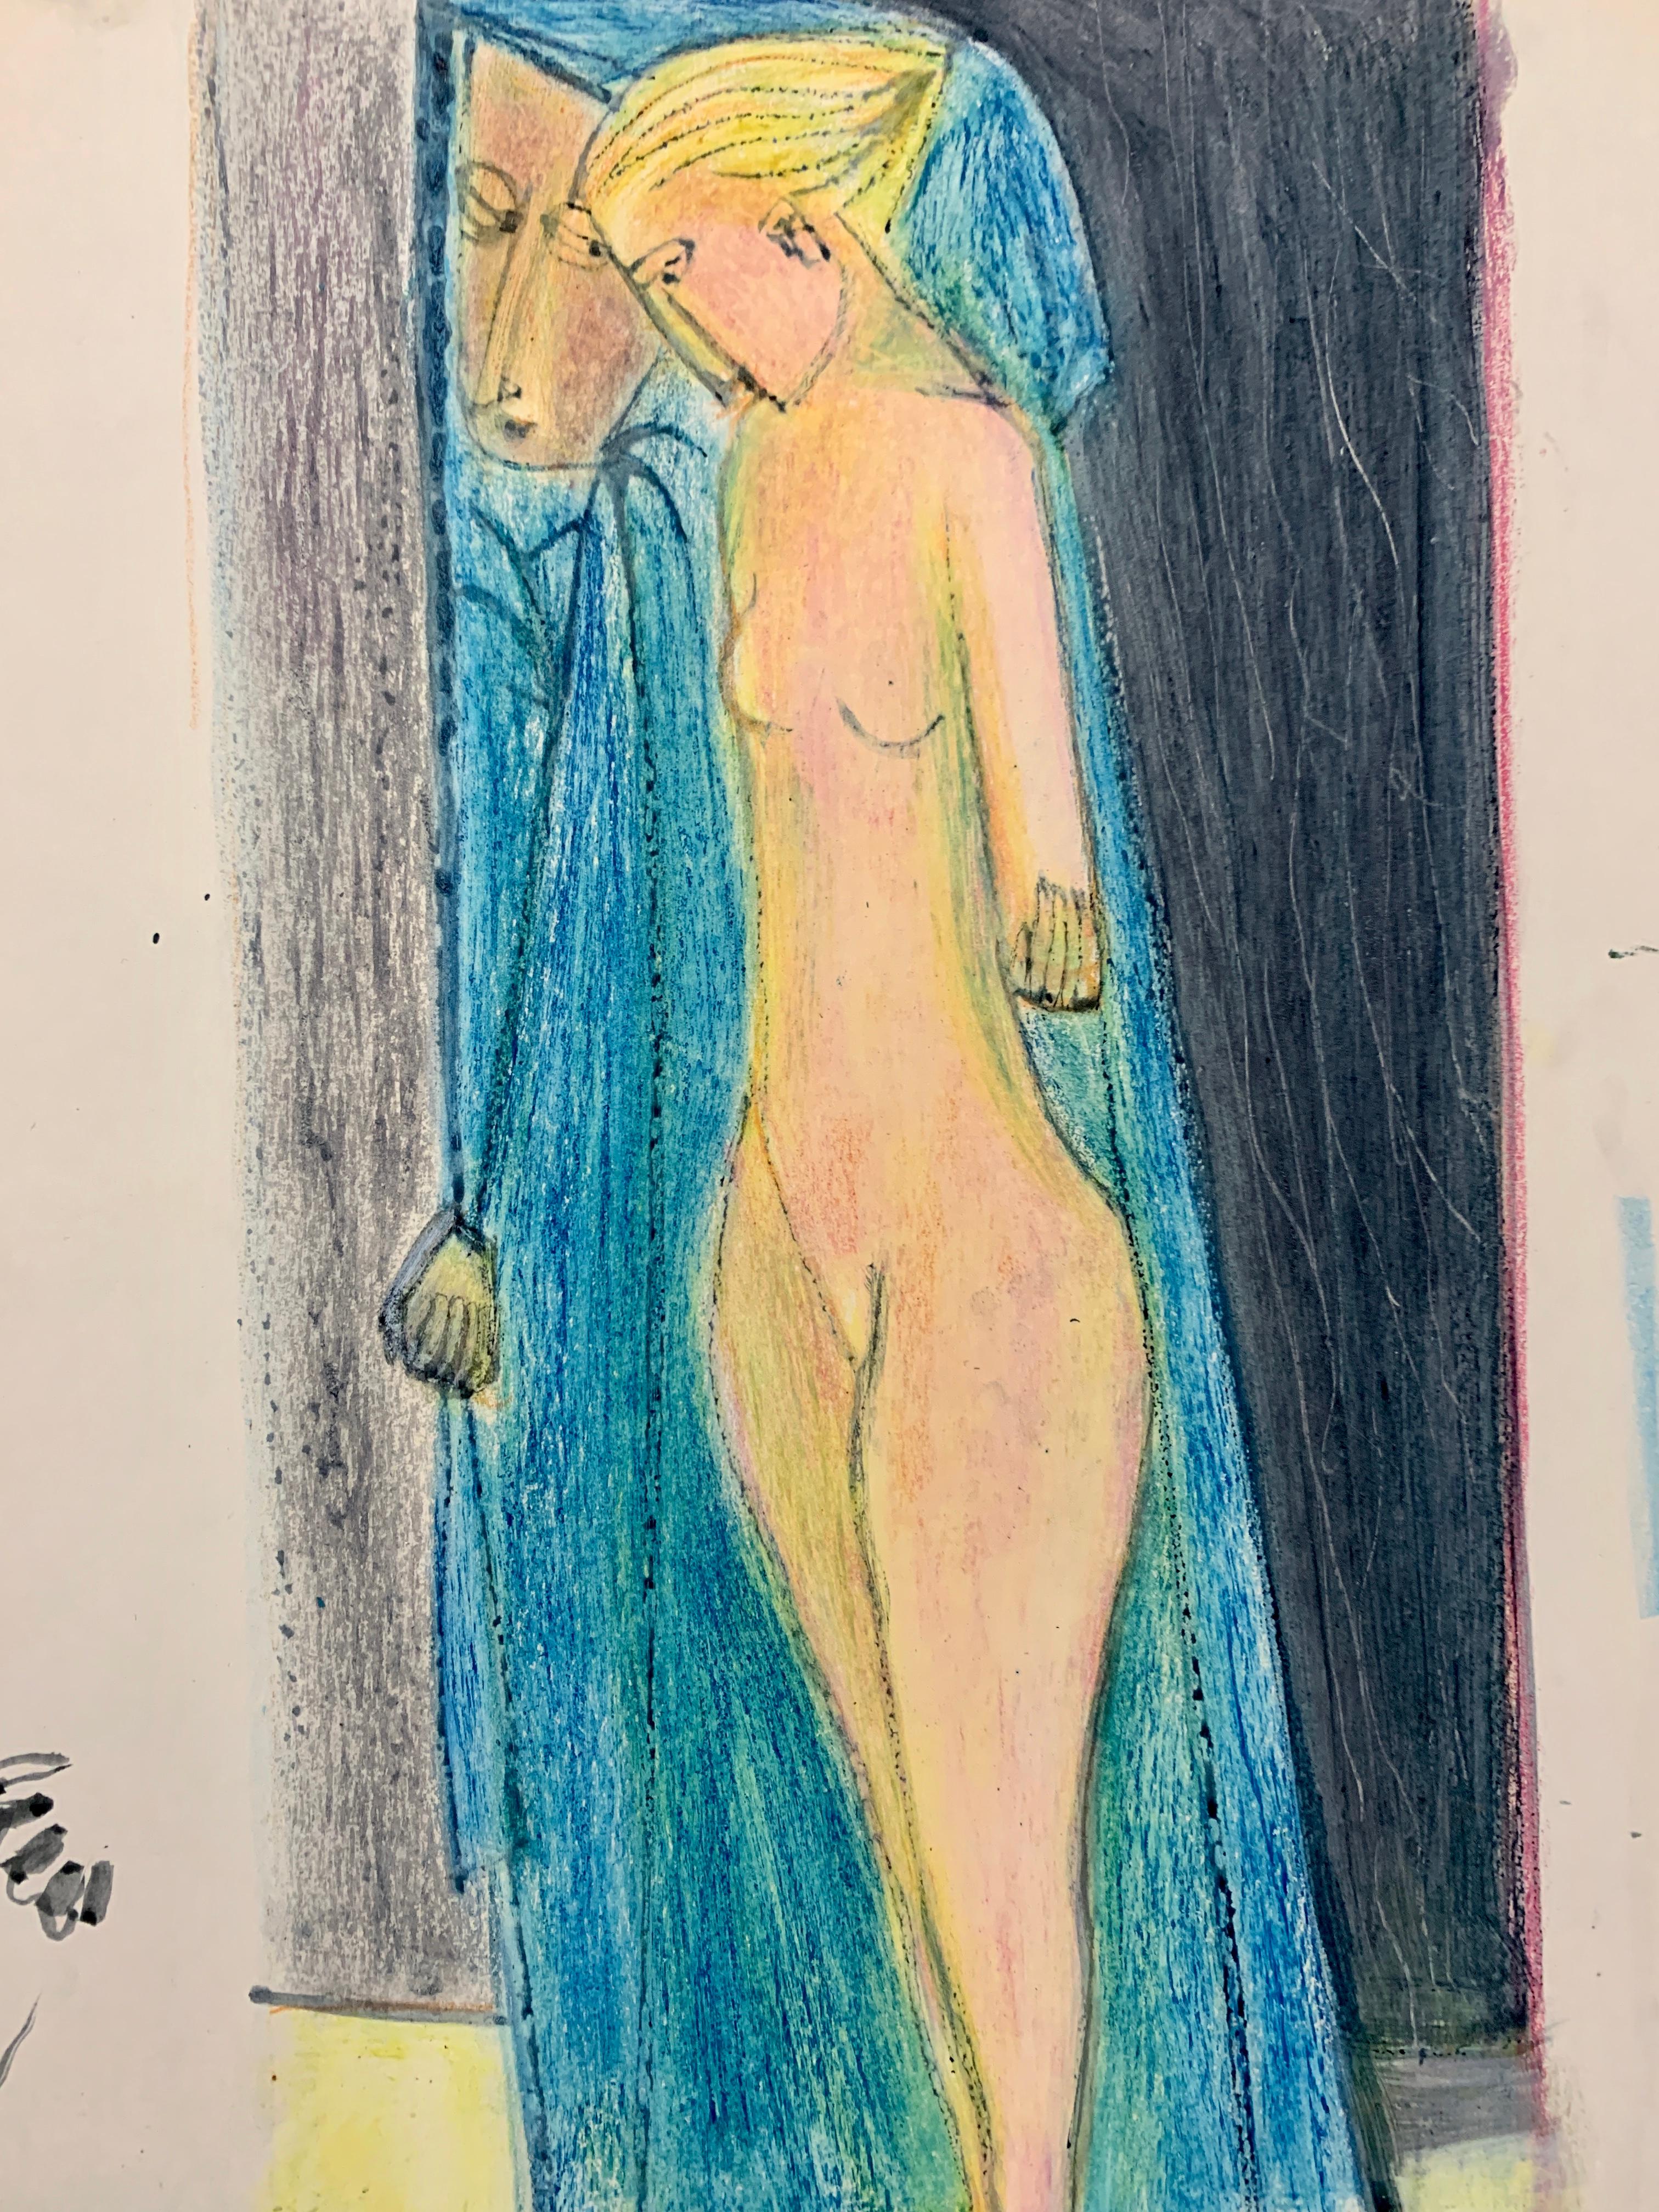 Donald Stacy
"Mirror in the Bathroom"
c.1950s
Oil pastel and gouache paint on paper
14" x 17" unframed
Unsigned
Came from artist's estate

Donald Stacy (1925-2011) New Jersey

Studied: Newark School of Fine Art
The Art Students League
Pratt Graphic